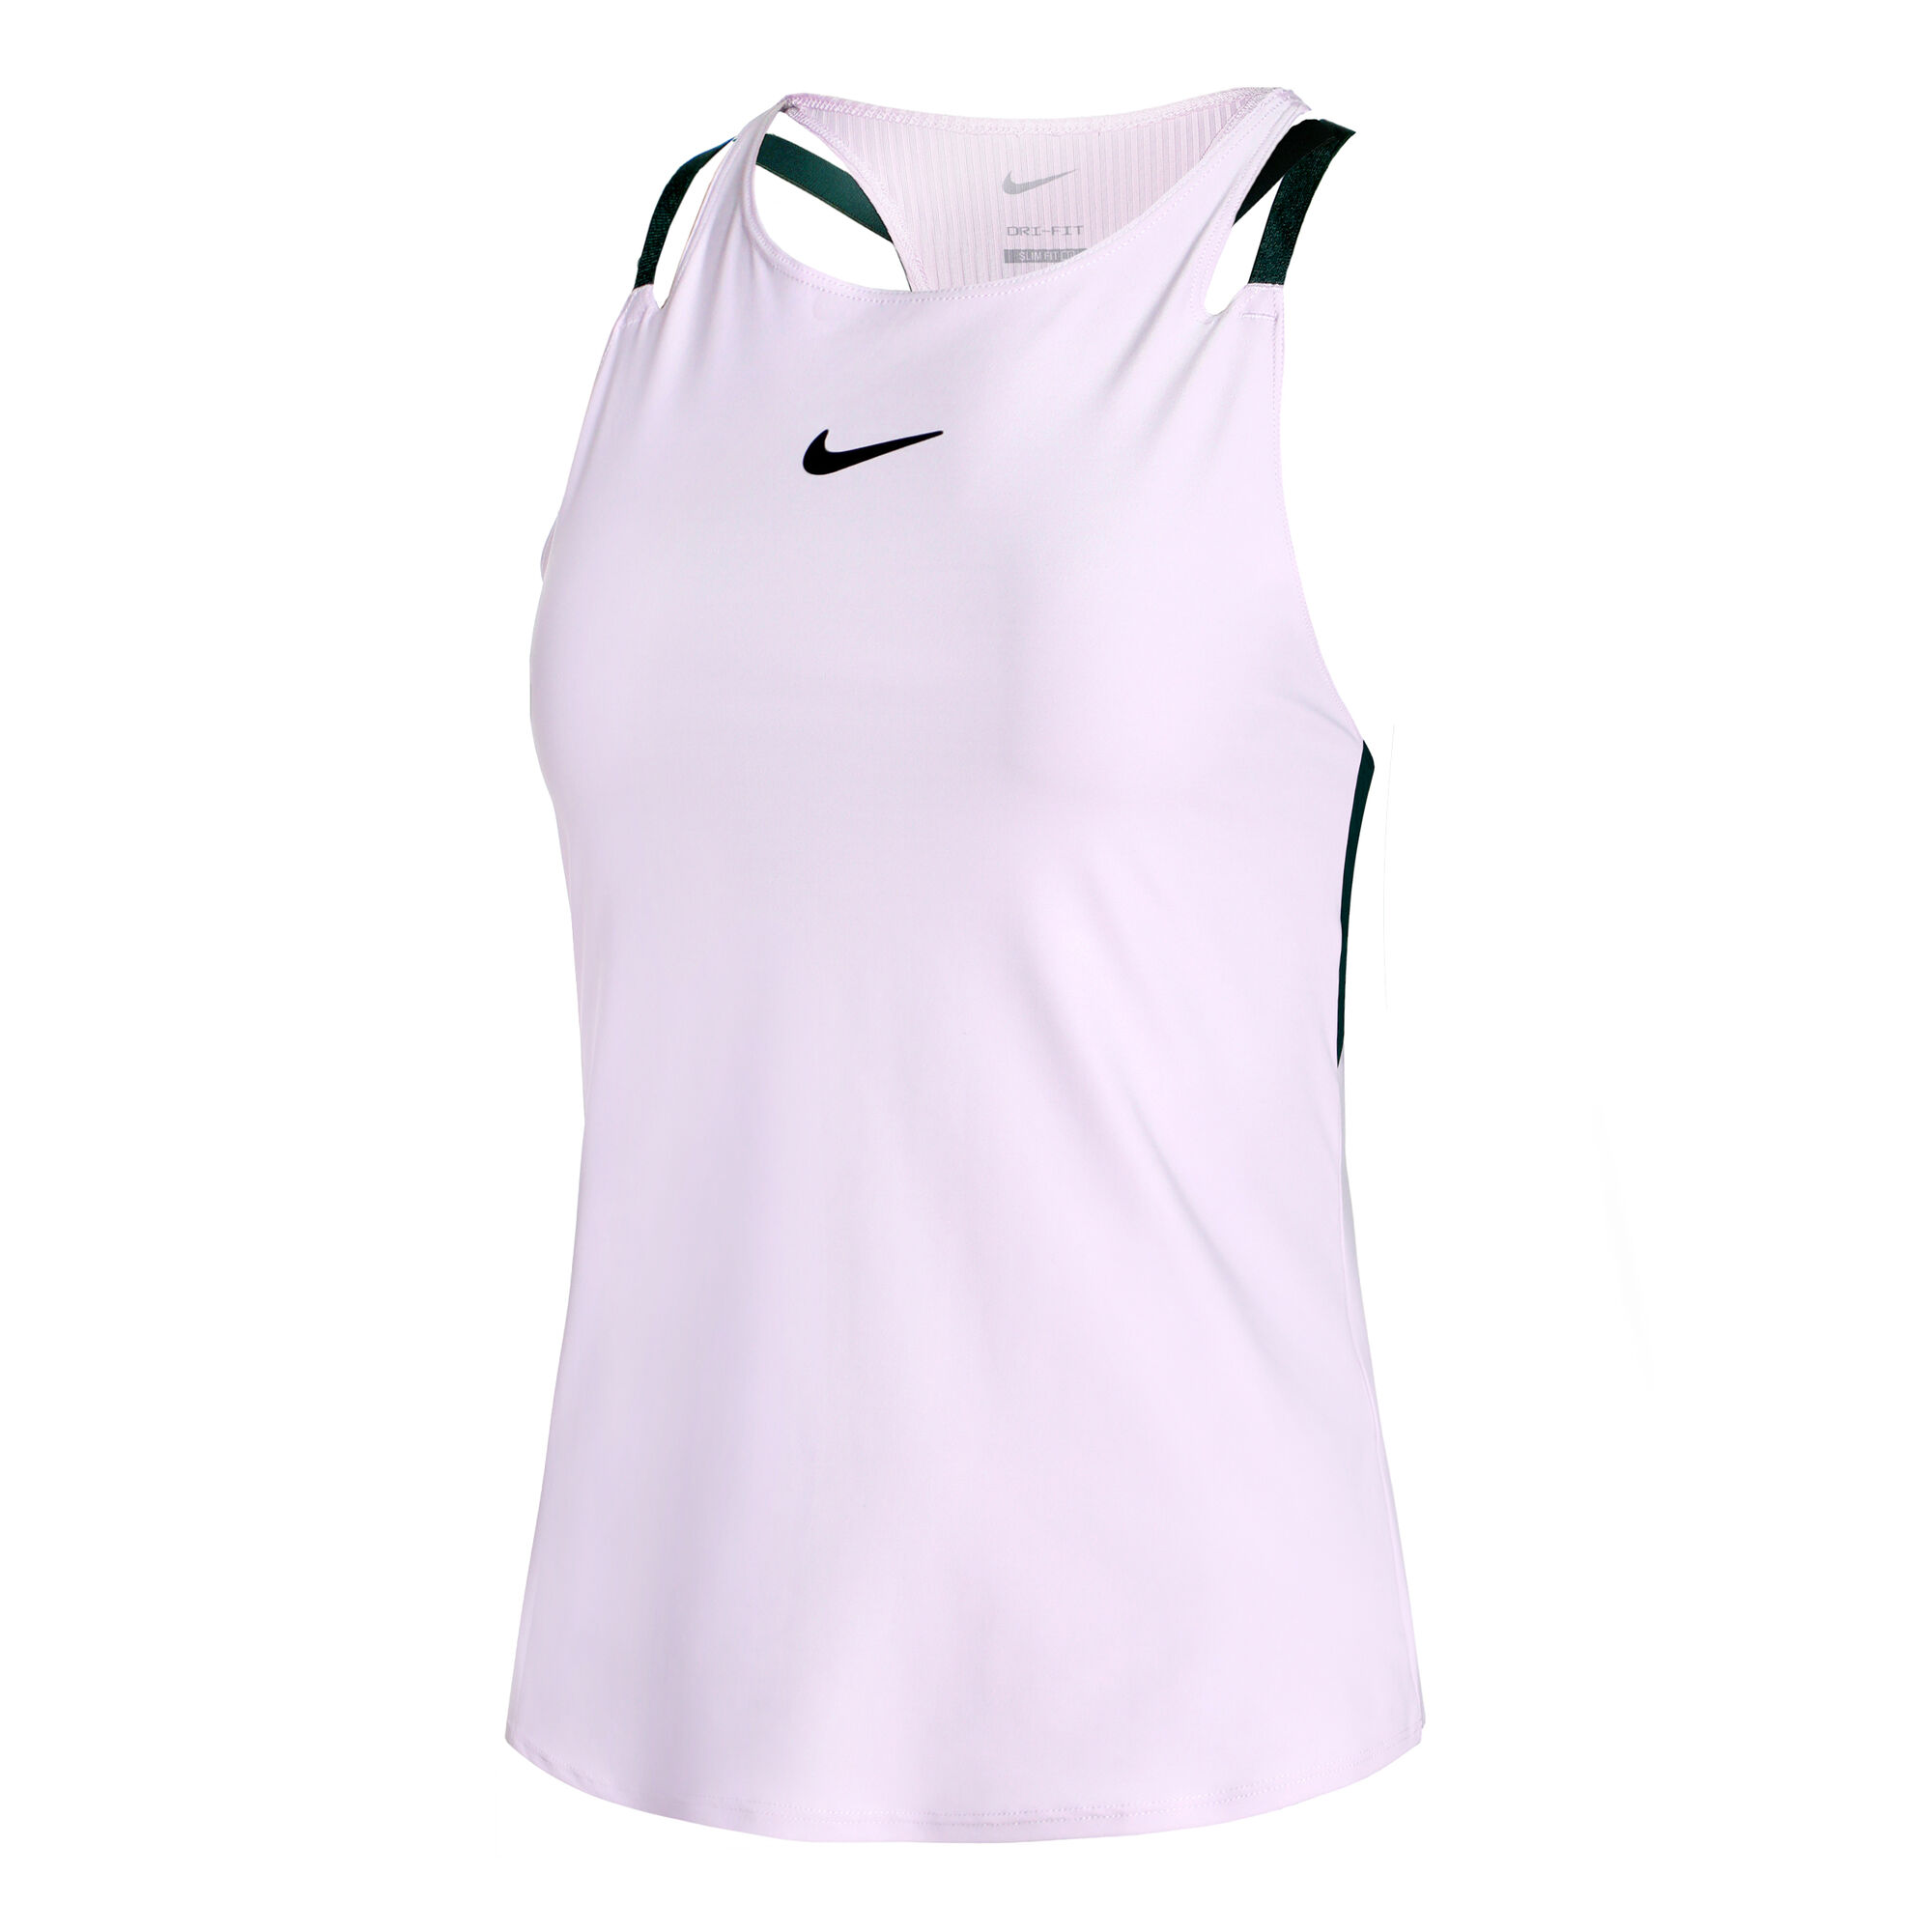 Nike One Training novelty dri fit lace back tank top in black